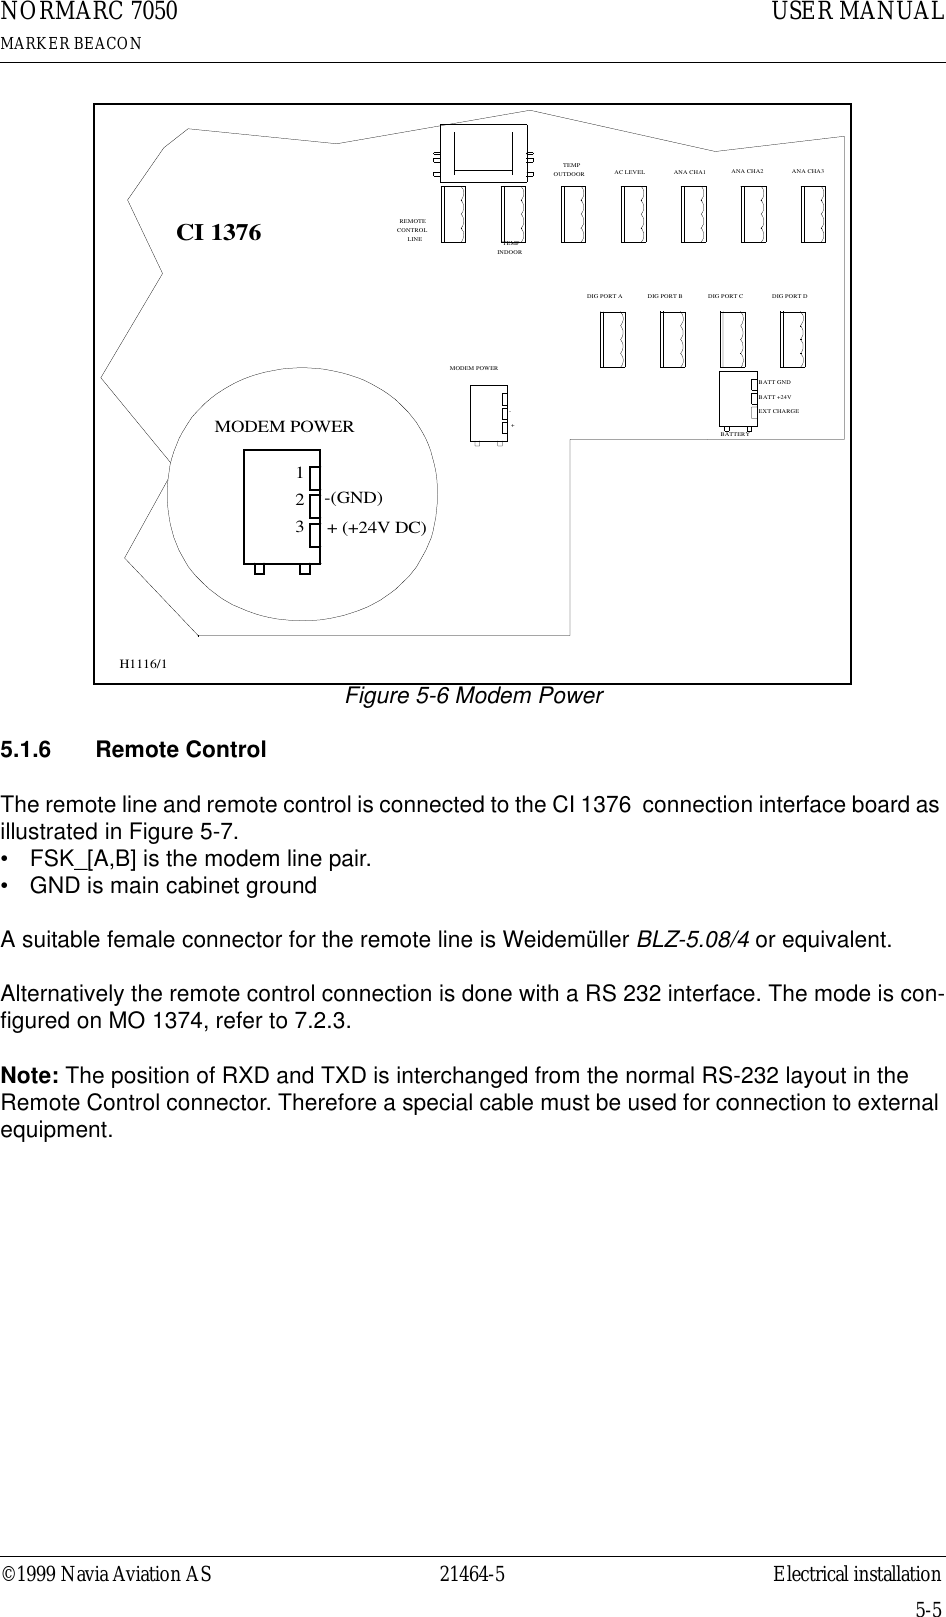 ©1999 Navia Aviation AS 21464-5 Electrical installationUSER MANUALNORMARC 7050MARKER BEACON5-5Figure 5-6 Modem Power5.1.6  Remote ControlThe remote line and remote control is connected to the CI 1376  connection interface board as illustrated in Figure 5-7. • FSK_[A,B] is the modem line pair.• GND is main cabinet groundA suitable female connector for the remote line is Weidemüller BLZ-5.08/4 or equivalent.Alternatively the remote control connection is done with a RS 232 interface. The mode is con-figured on MO 1374, refer to 7.2.3.Note: The position of RXD and TXD is interchanged from the normal RS-232 layout in the Remote Control connector. Therefore a special cable must be used for connection to external equipment.CI 1376REMOTECONTROLLINETEMPOUTDOORTEMPINDOORAC LEVEL ANA CHA1 ANA CHA2 ANA CHA3DIG PORT A DIG PORT B DIG PORT C DIG PORT D-(GND)123BATT GNDEXT CHARGEBATT +24VBATTERY- ++ (+24V DC)MODEM POWERMODEM POWERH1116/1